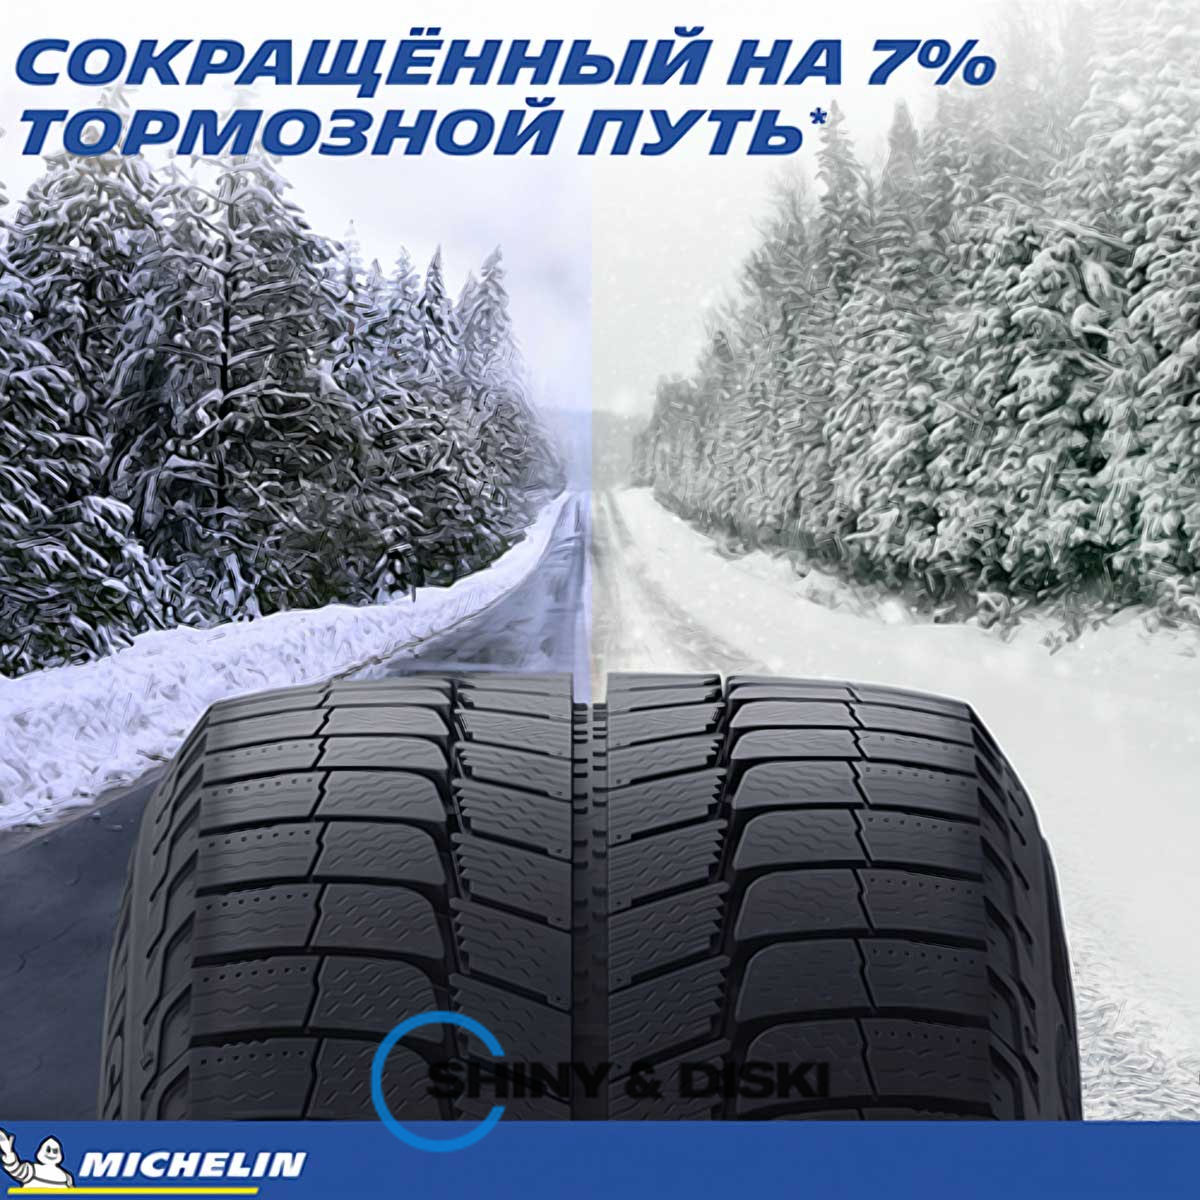 покришки michelin x-ice xi3+ 215/50 r17 95h xl